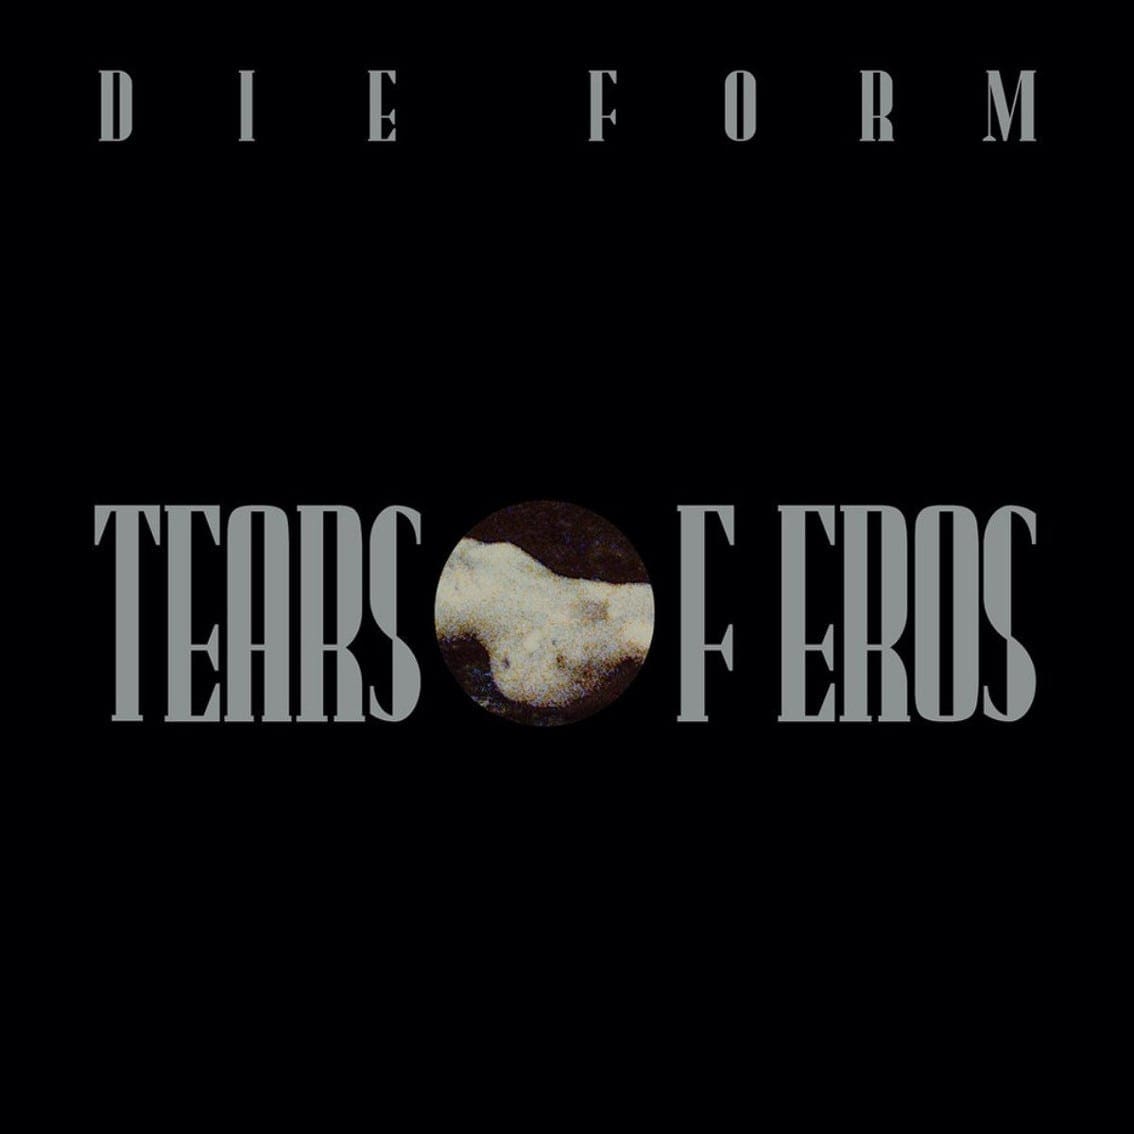 Die Form reissue 'Tears of Eros' on vinyl for the very first time including bonus